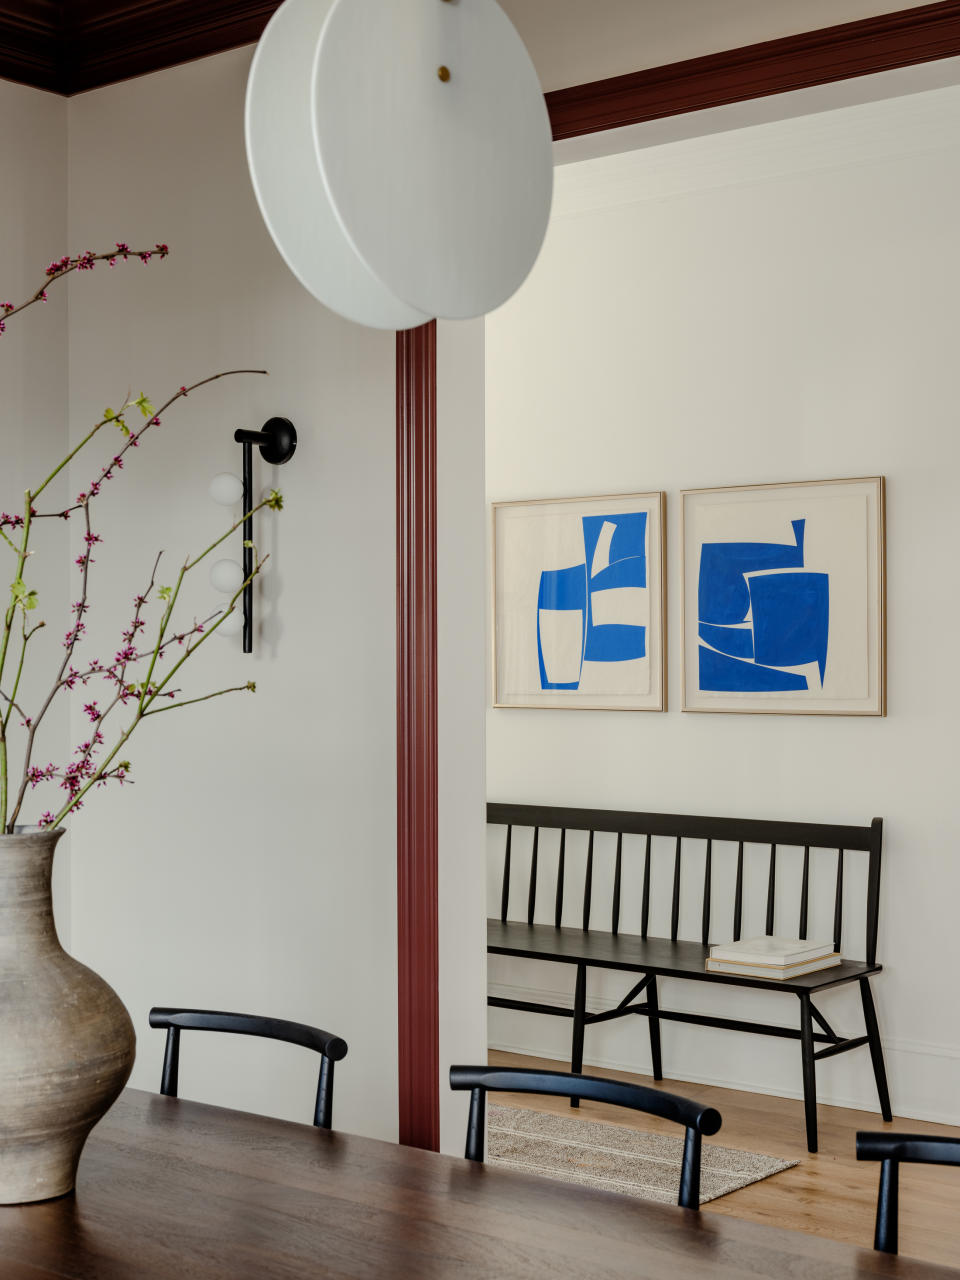 hallway with white walls, blue abstract art and black bench, view through dining room